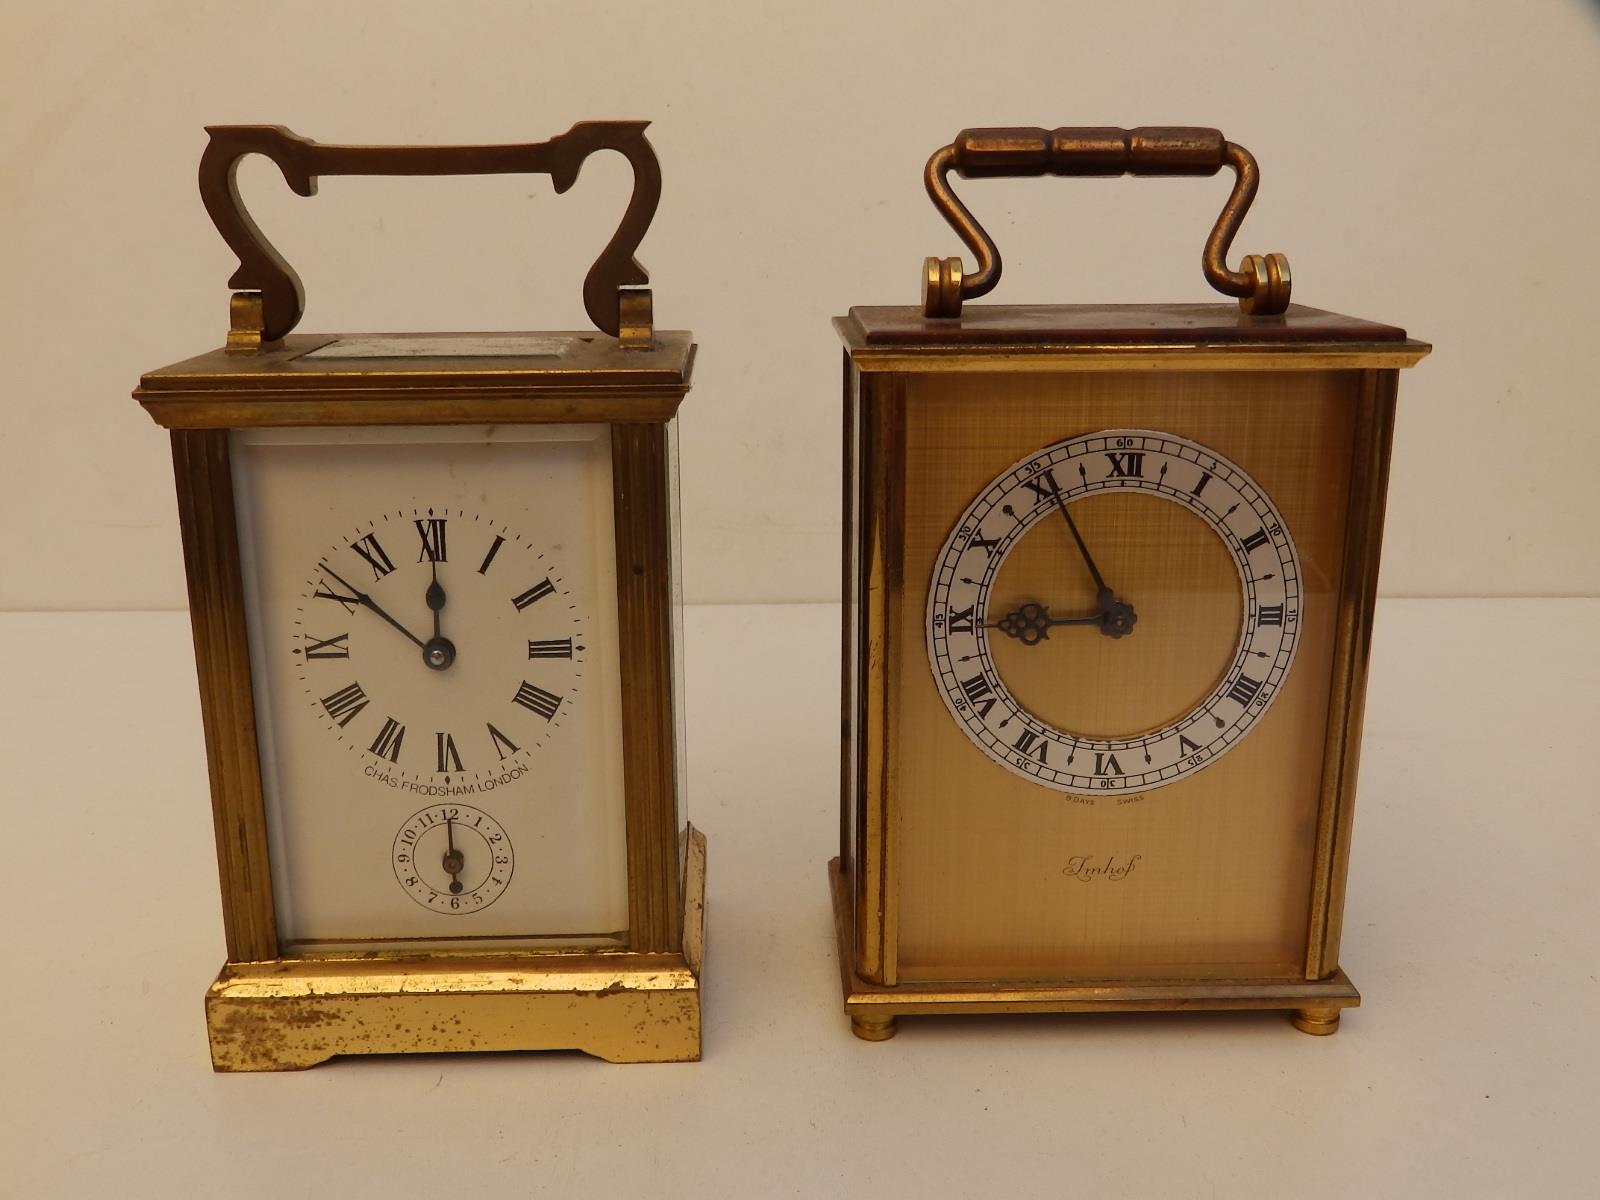 A Charles Frodsham brass alarm carriage clock - bell missing, 4.5" high excluding handle and a 20thC